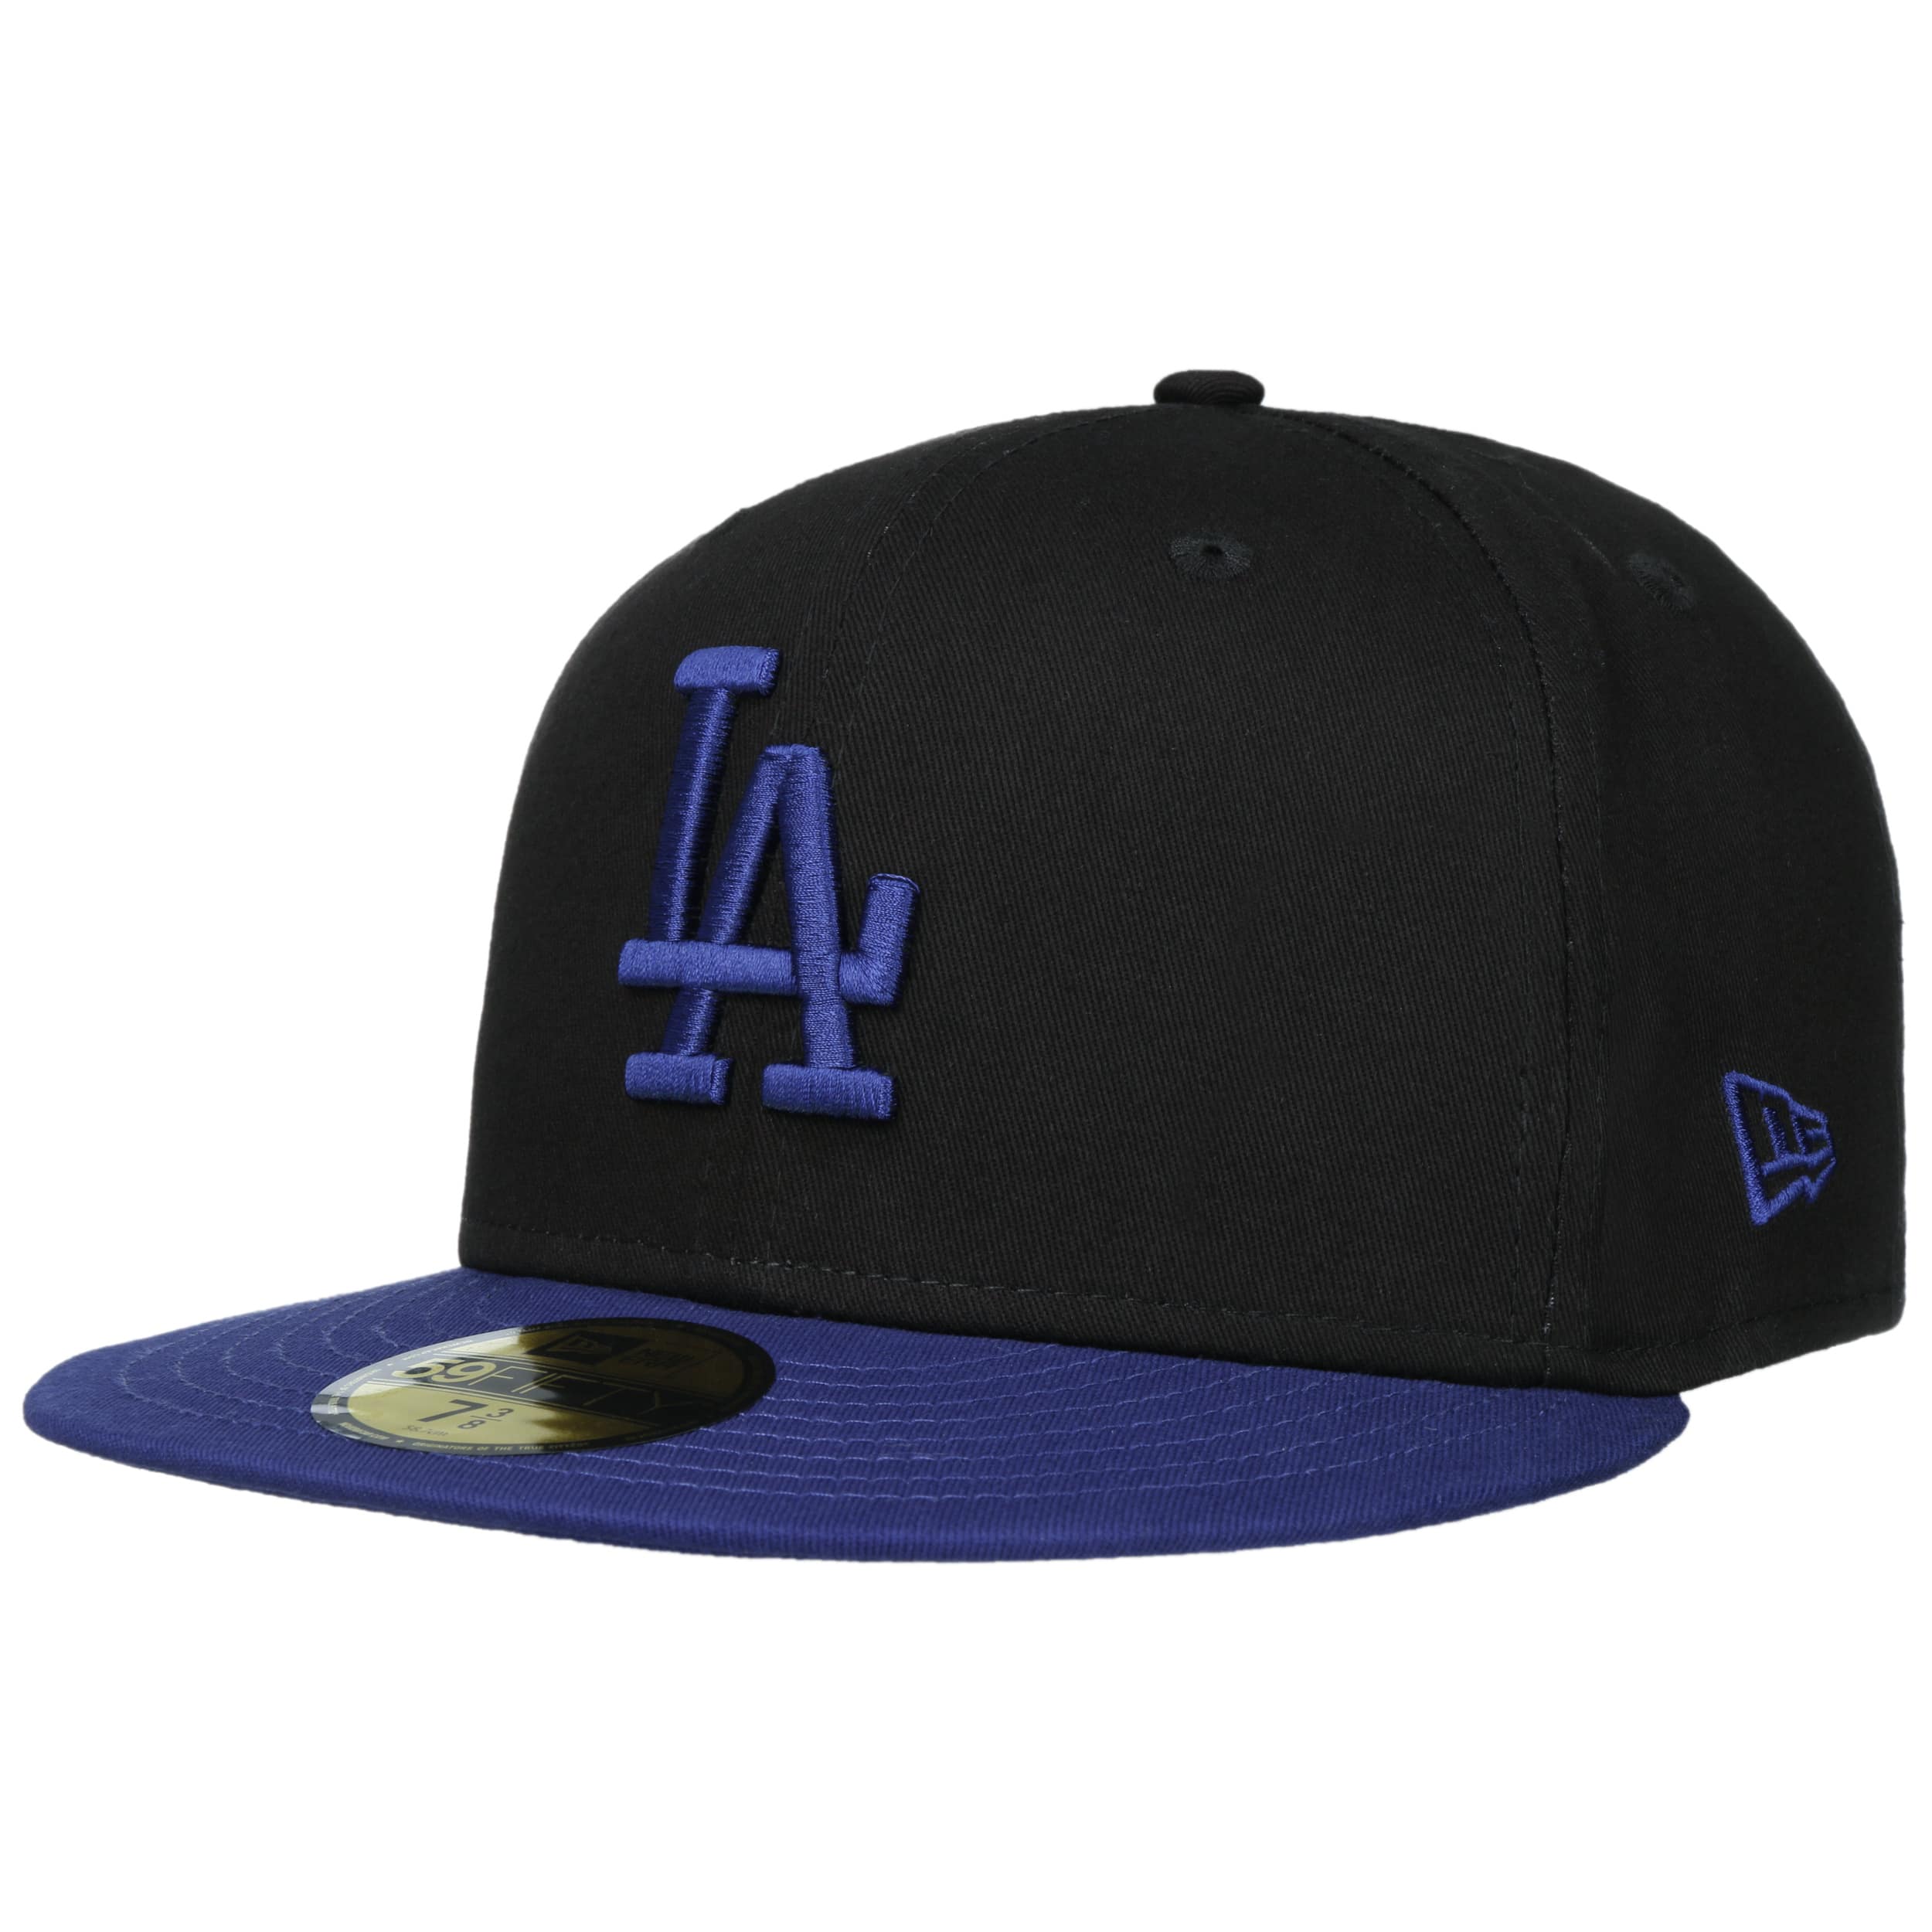 59Fifty Series Los Angeles Dodgers Cap by New Era - 48,95 €